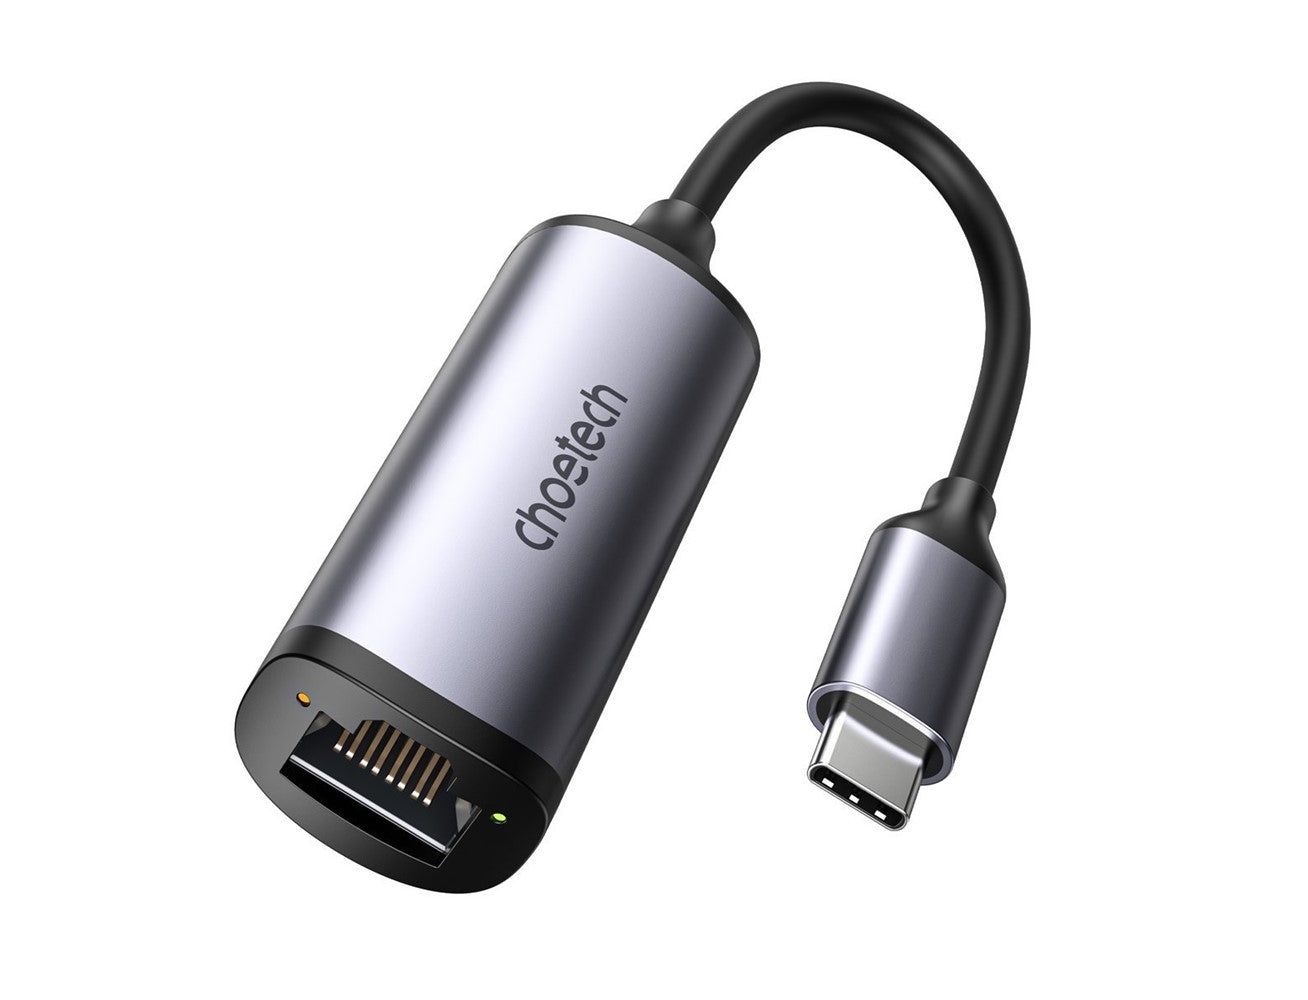 Choetech USB C To Gigabit Ethernet Adapter 2.5G Type C To RJ45 LAN Network Adapter Connector HUB-R02